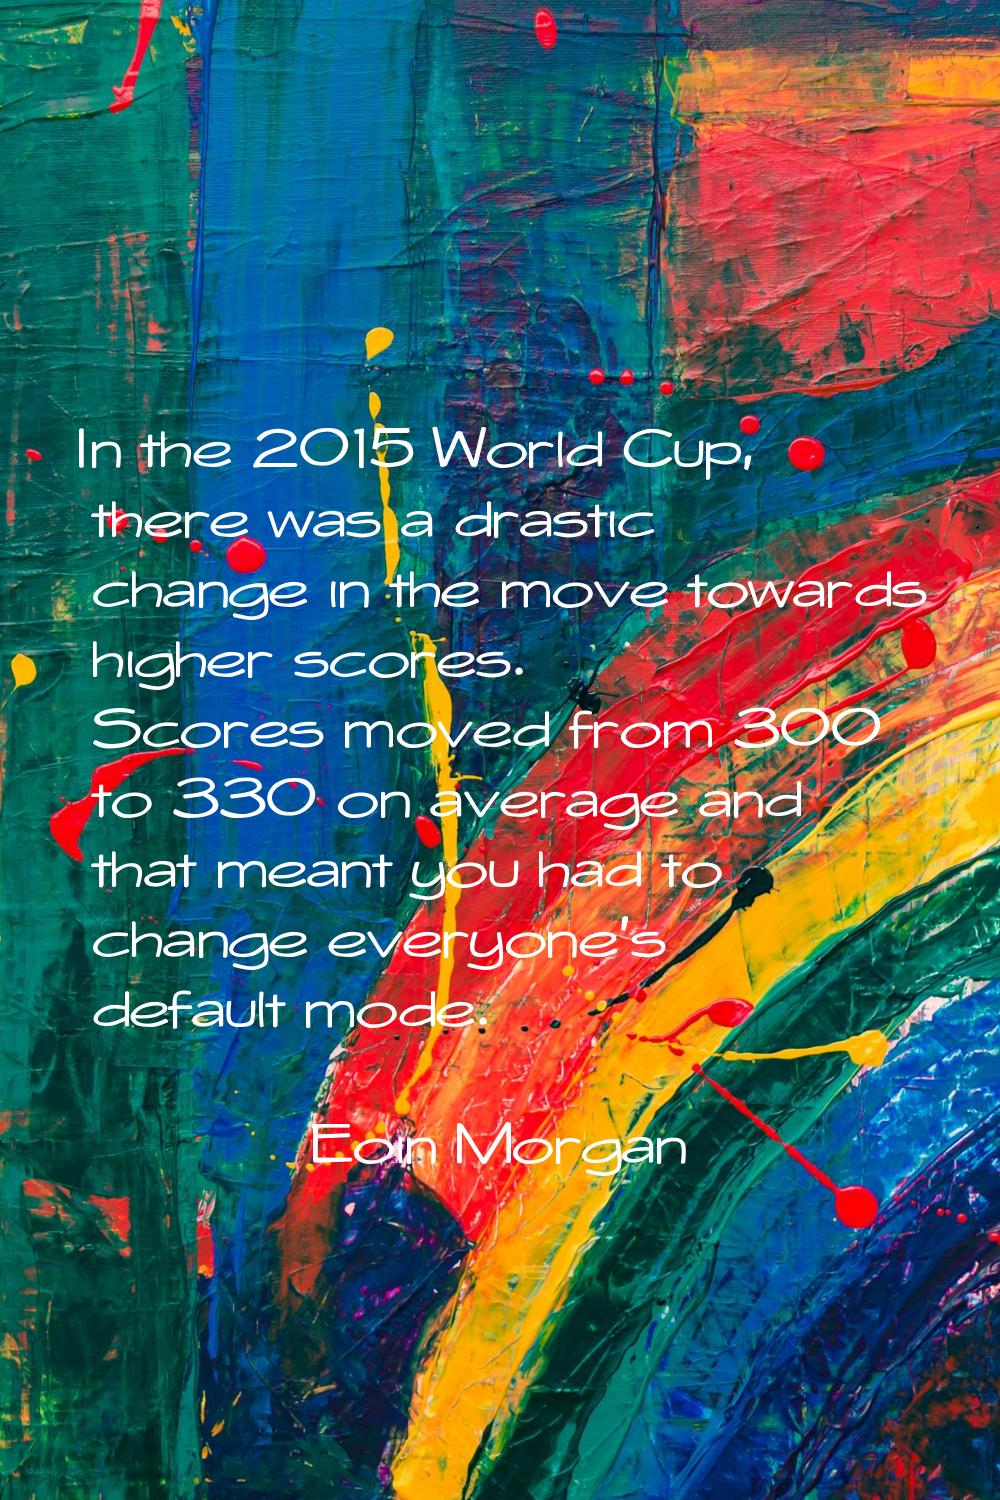 In the 2015 World Cup, there was a drastic change in the move towards higher scores. Scores moved f